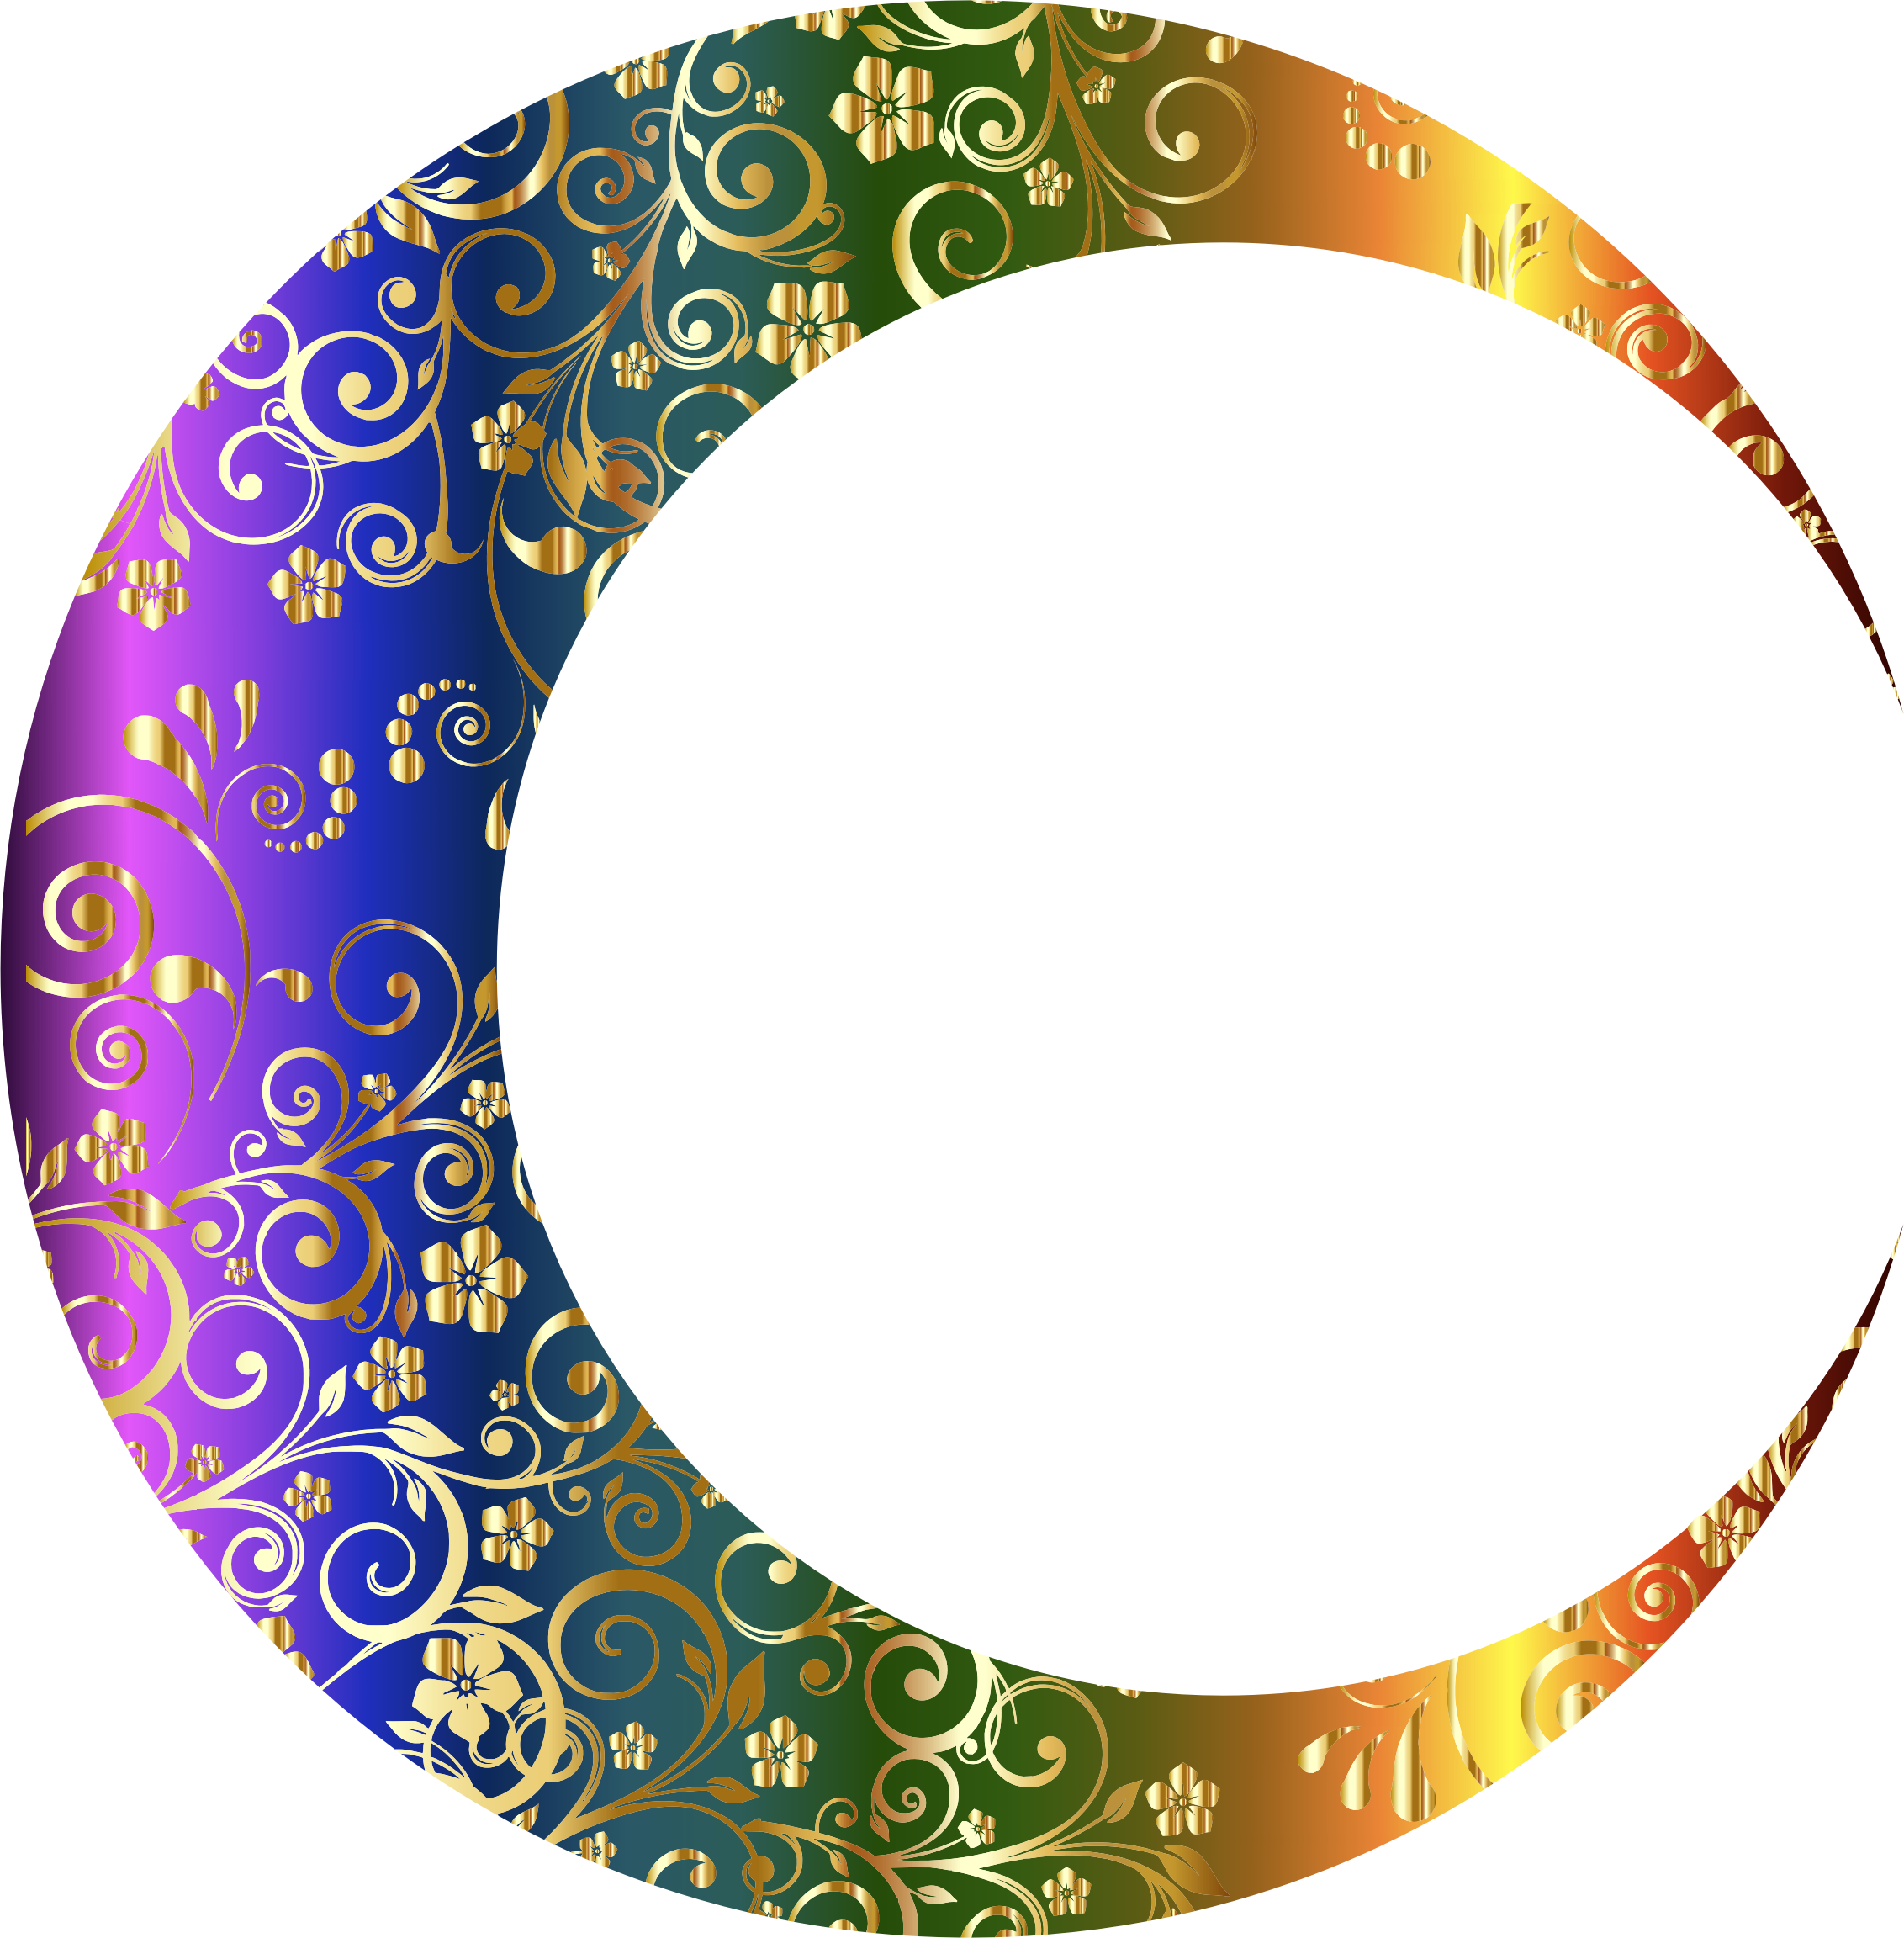 Image Result For Moon Images - Rainbow Crescent Moon Png (2264x2304)